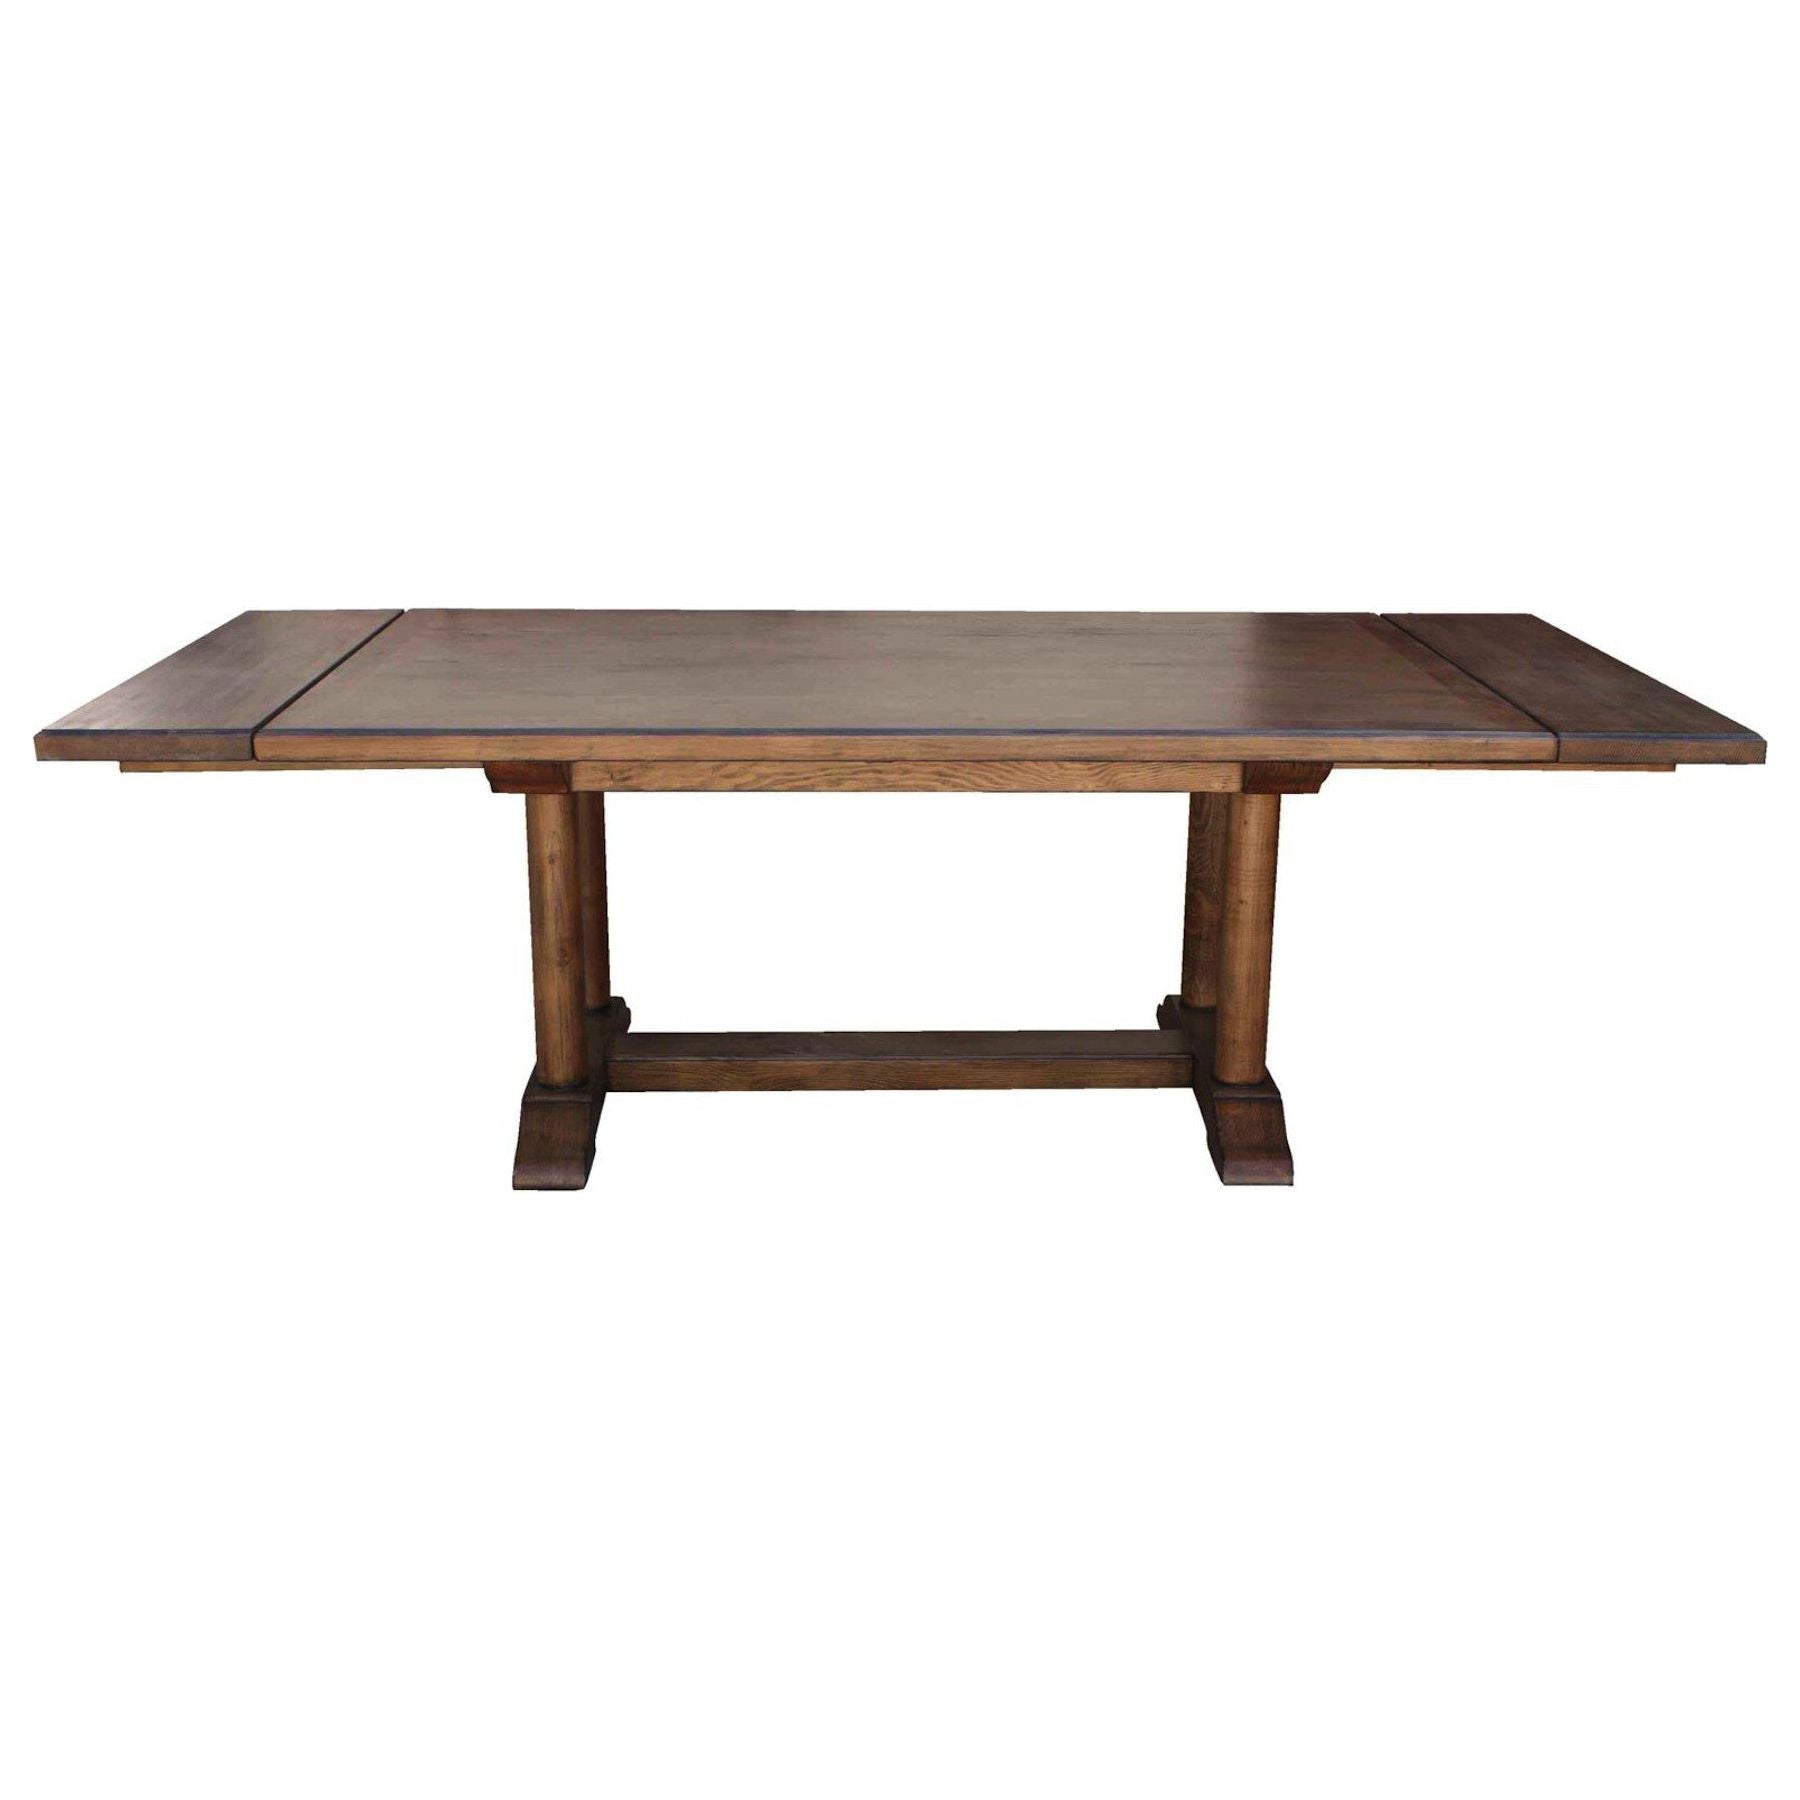 Cambria Rustic Extension Trestle Dining Table Built In Reclaimed Wood Mortise Tenon